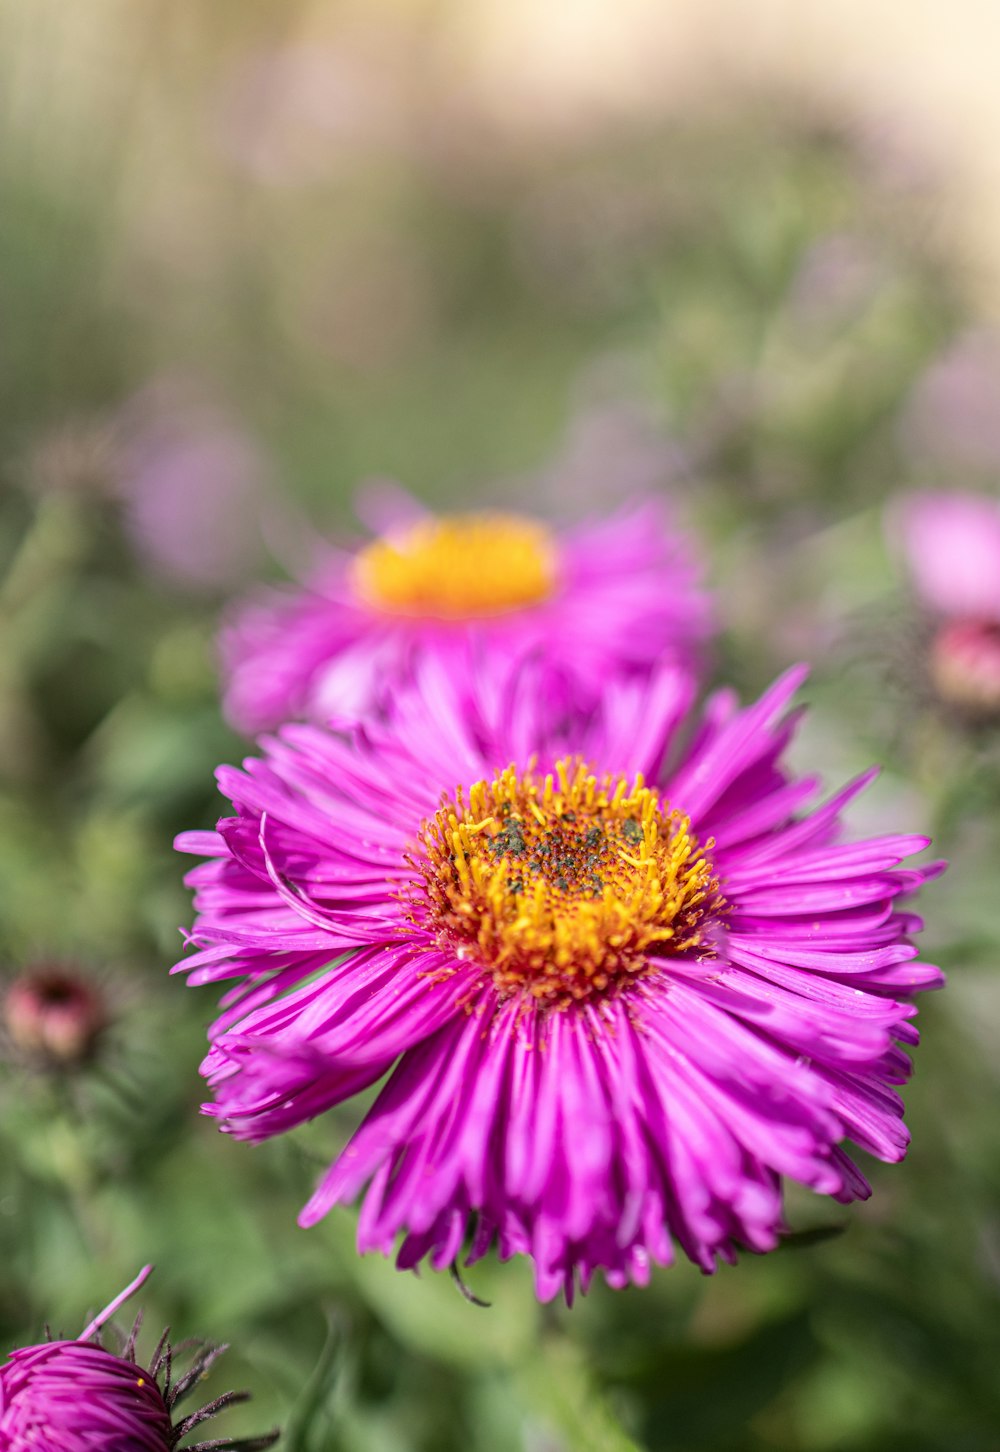 a purple flower with a yellow center surrounded by other flowers